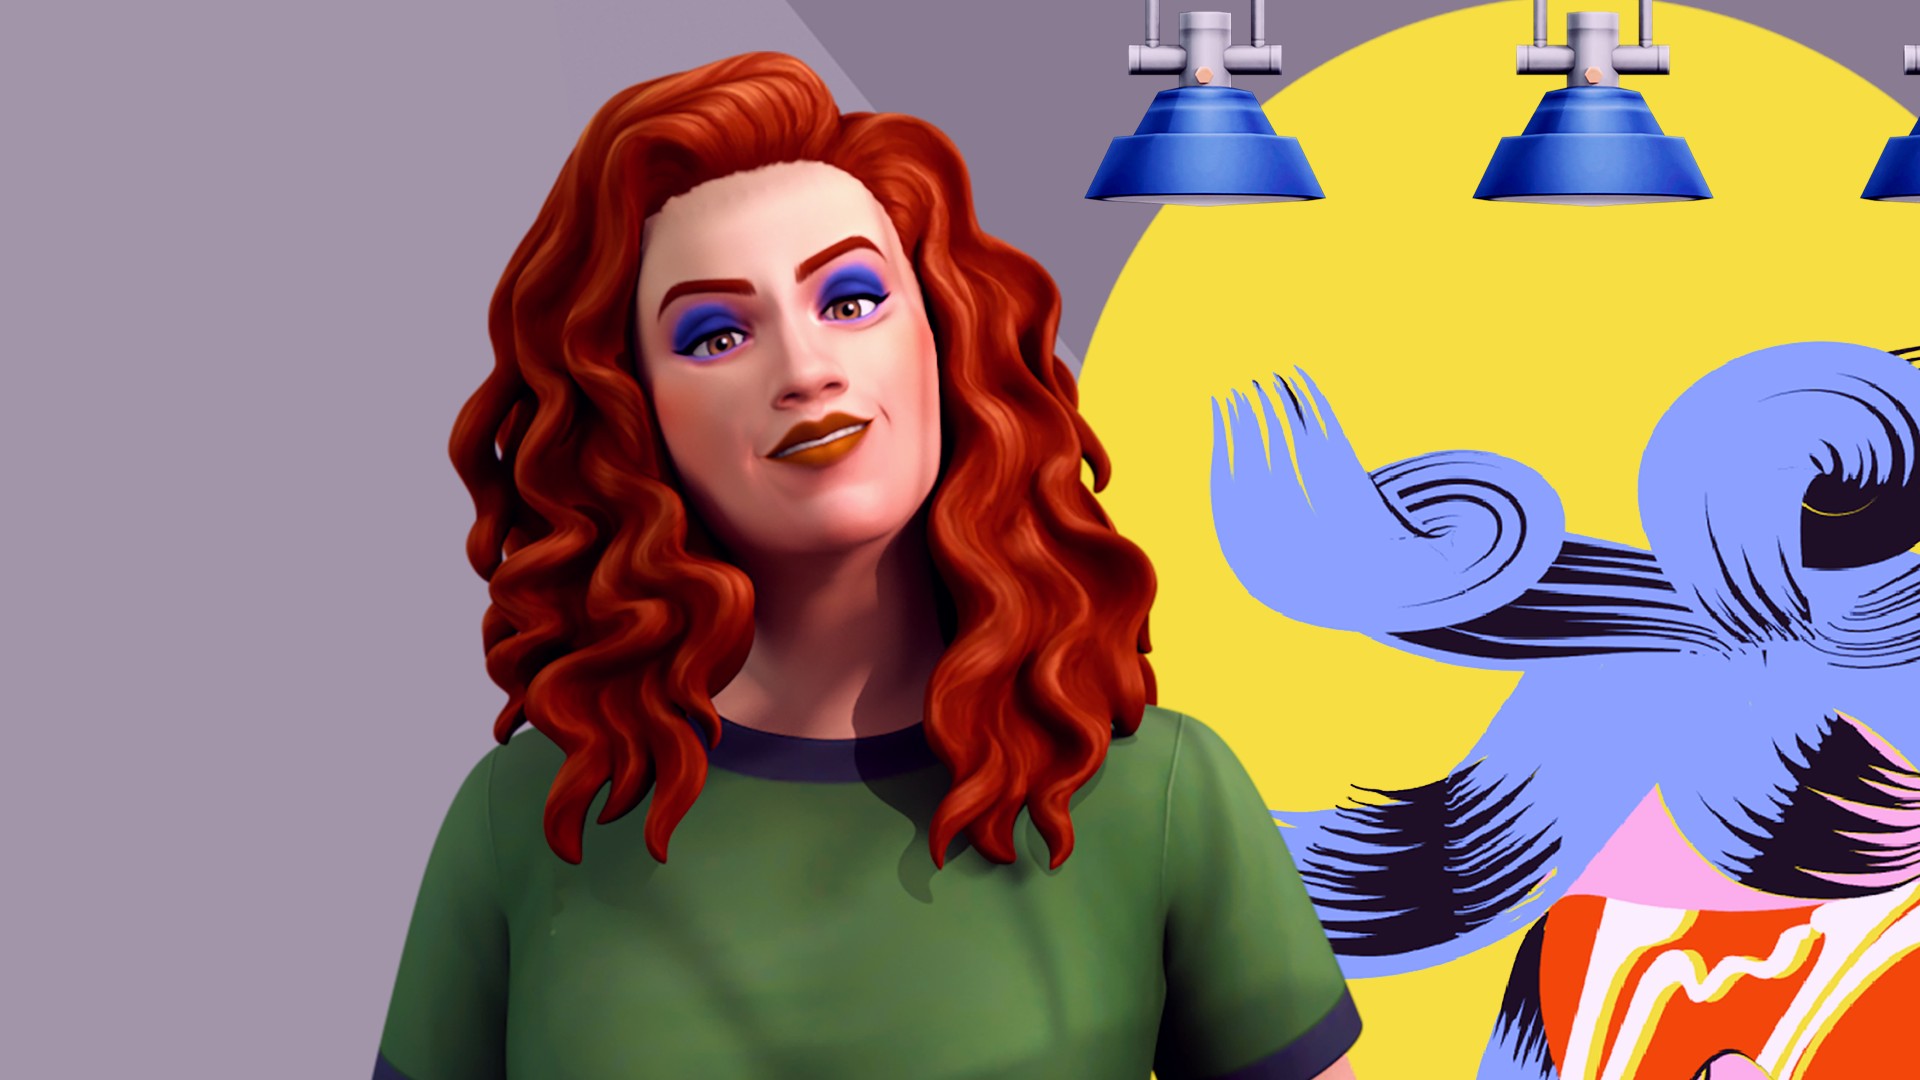 Sims 4 pack lets you turn your house into an absolute disgrace